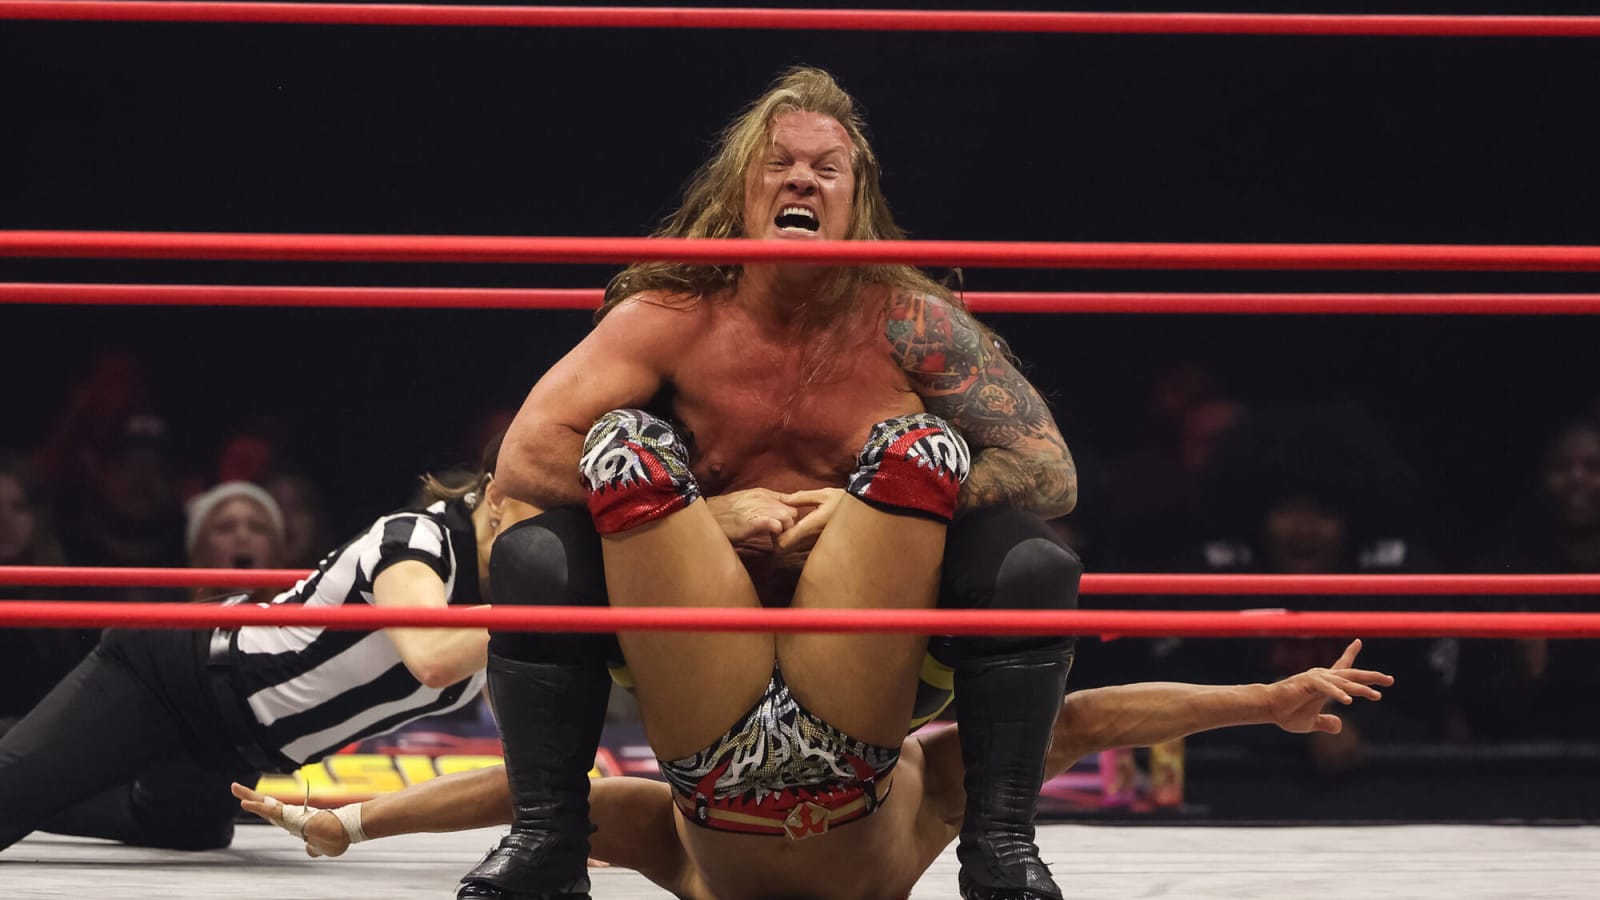 Chris Jericho Seemingly Has Change Of Heart On If He’d Leave AEW For WWE Return?